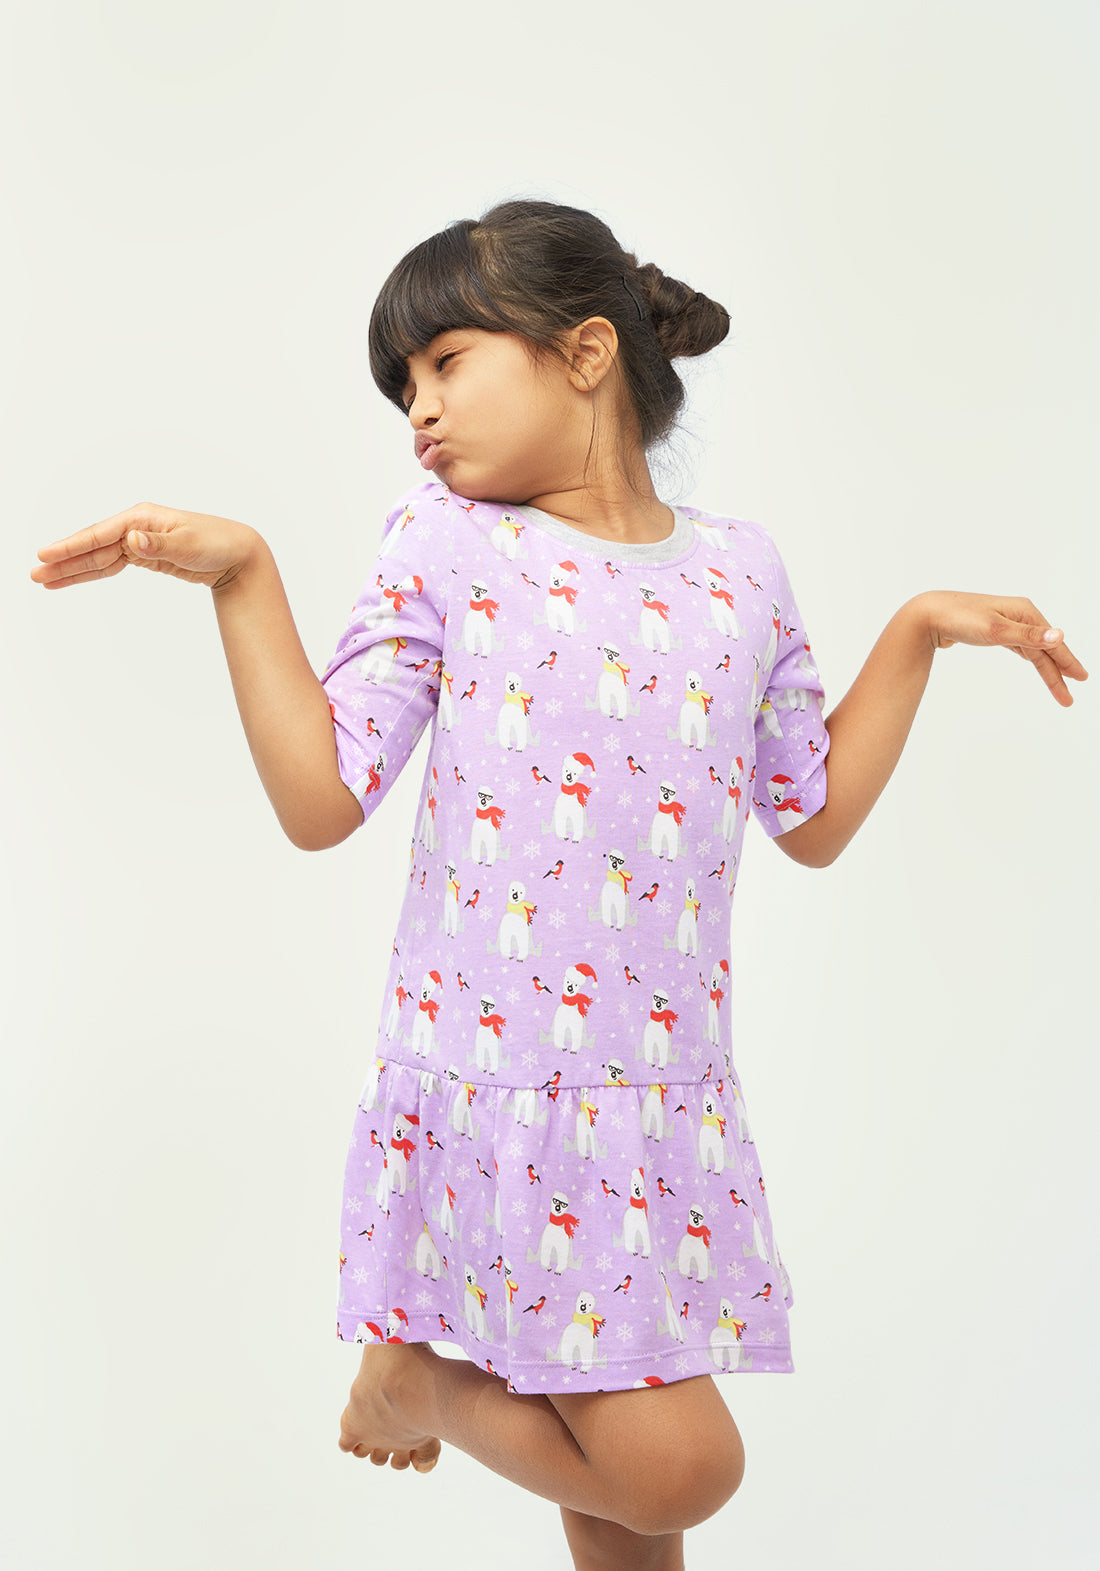 LILAC, WHITE AND RED POLAR BEAR PRINT FIT AND FLARED DRESS